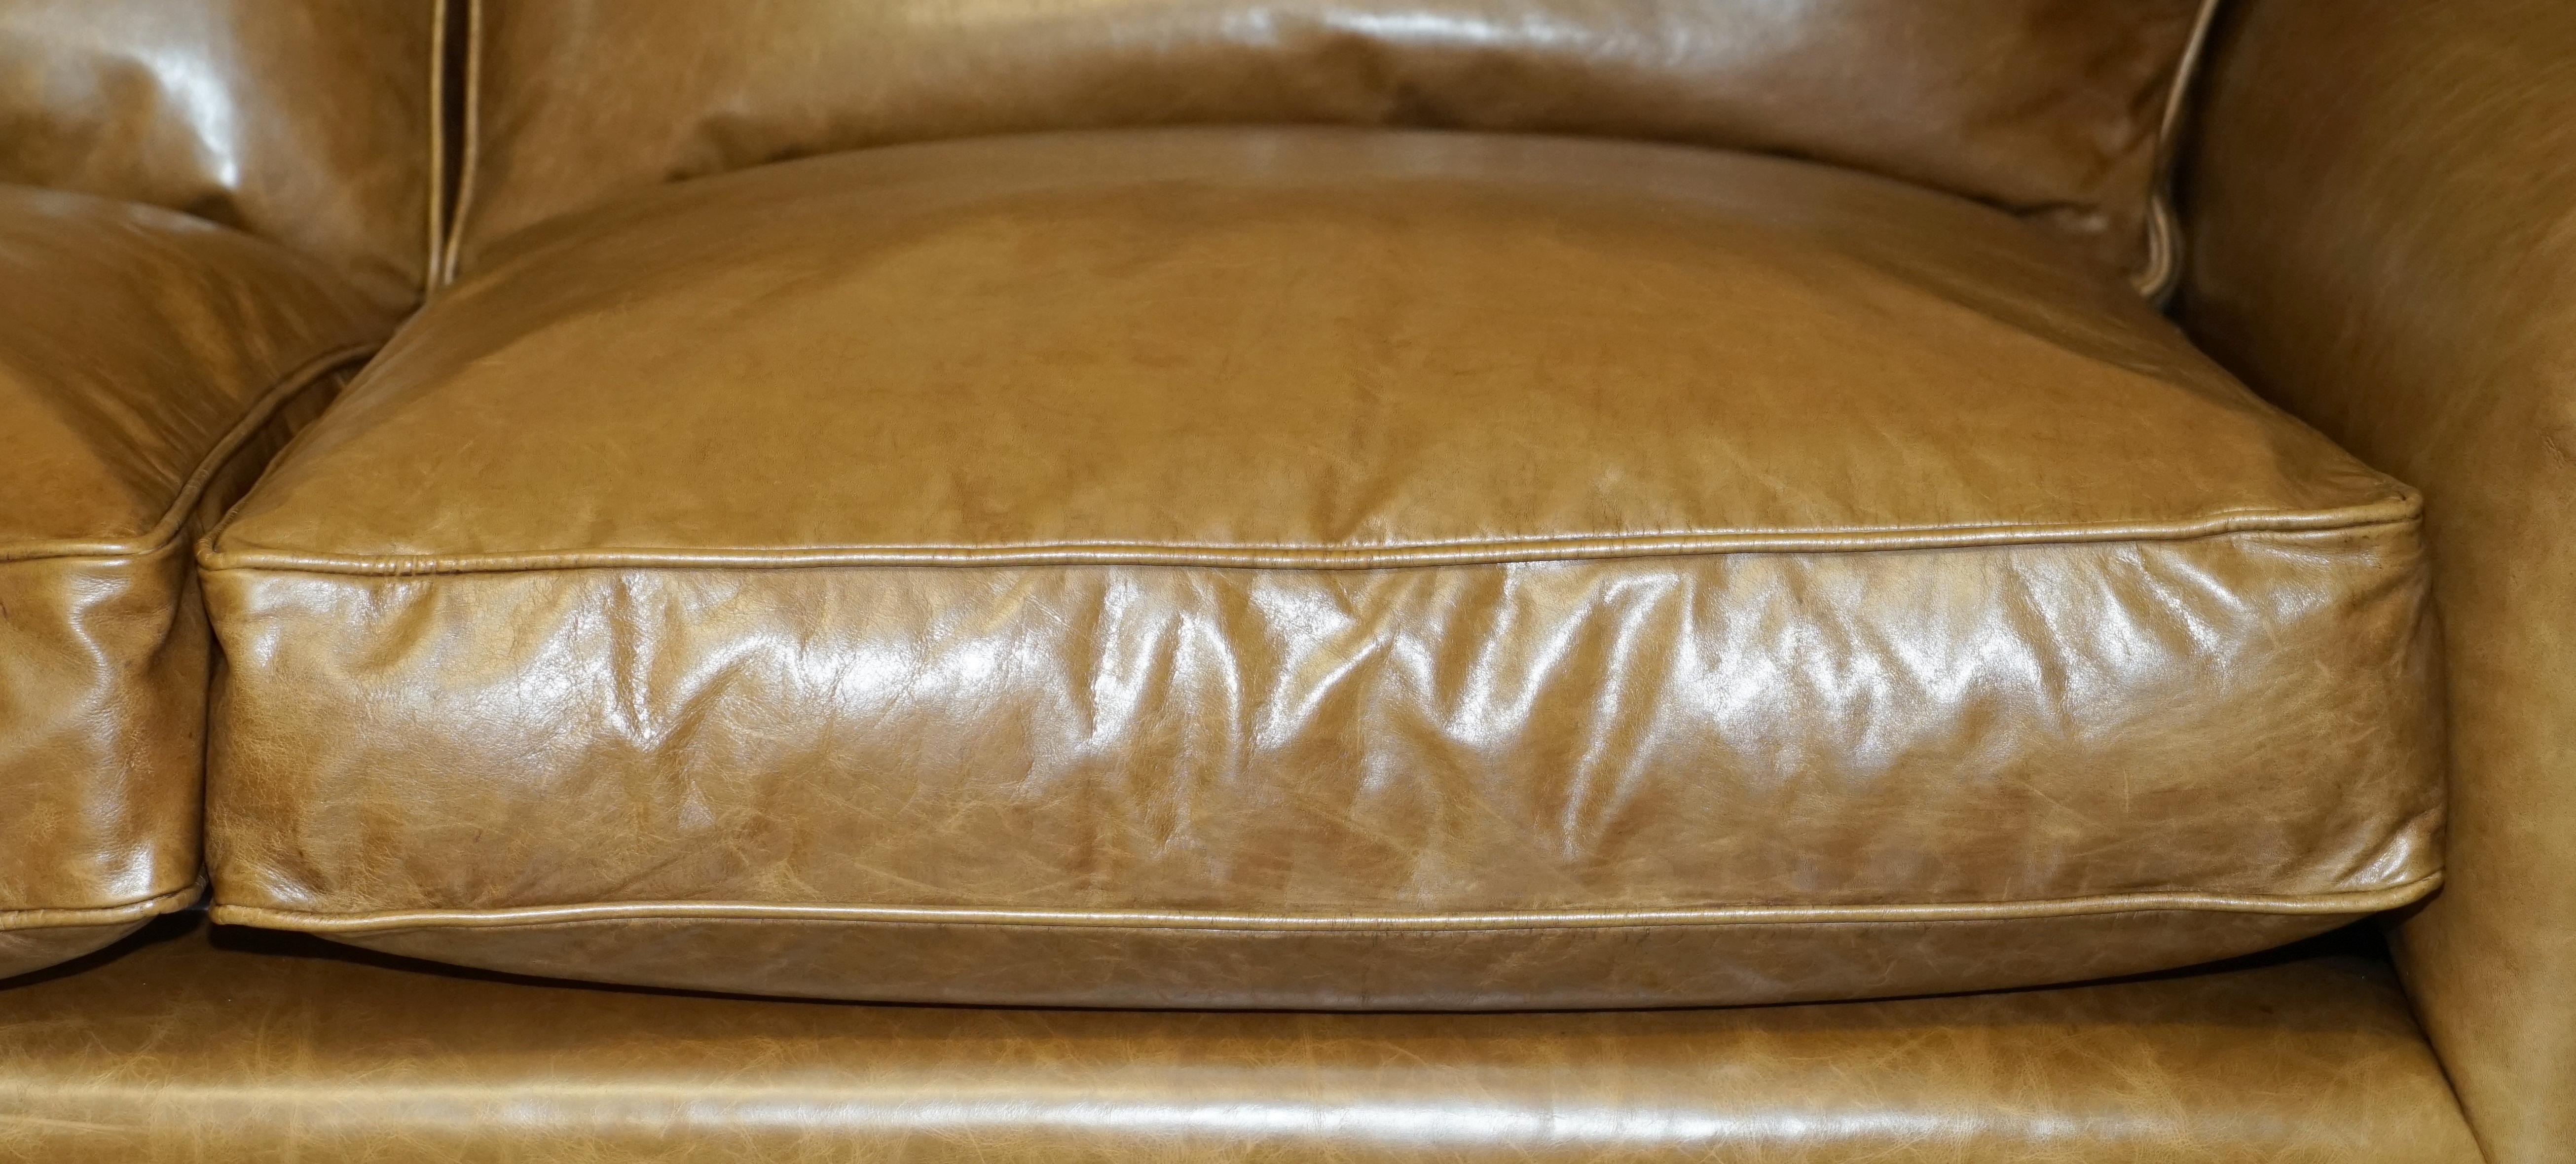 LOVELY GEORGE SMITH FULL SCROLL ARM CUSHiON BACK BROWN LEATHER SOFA For Sale 1